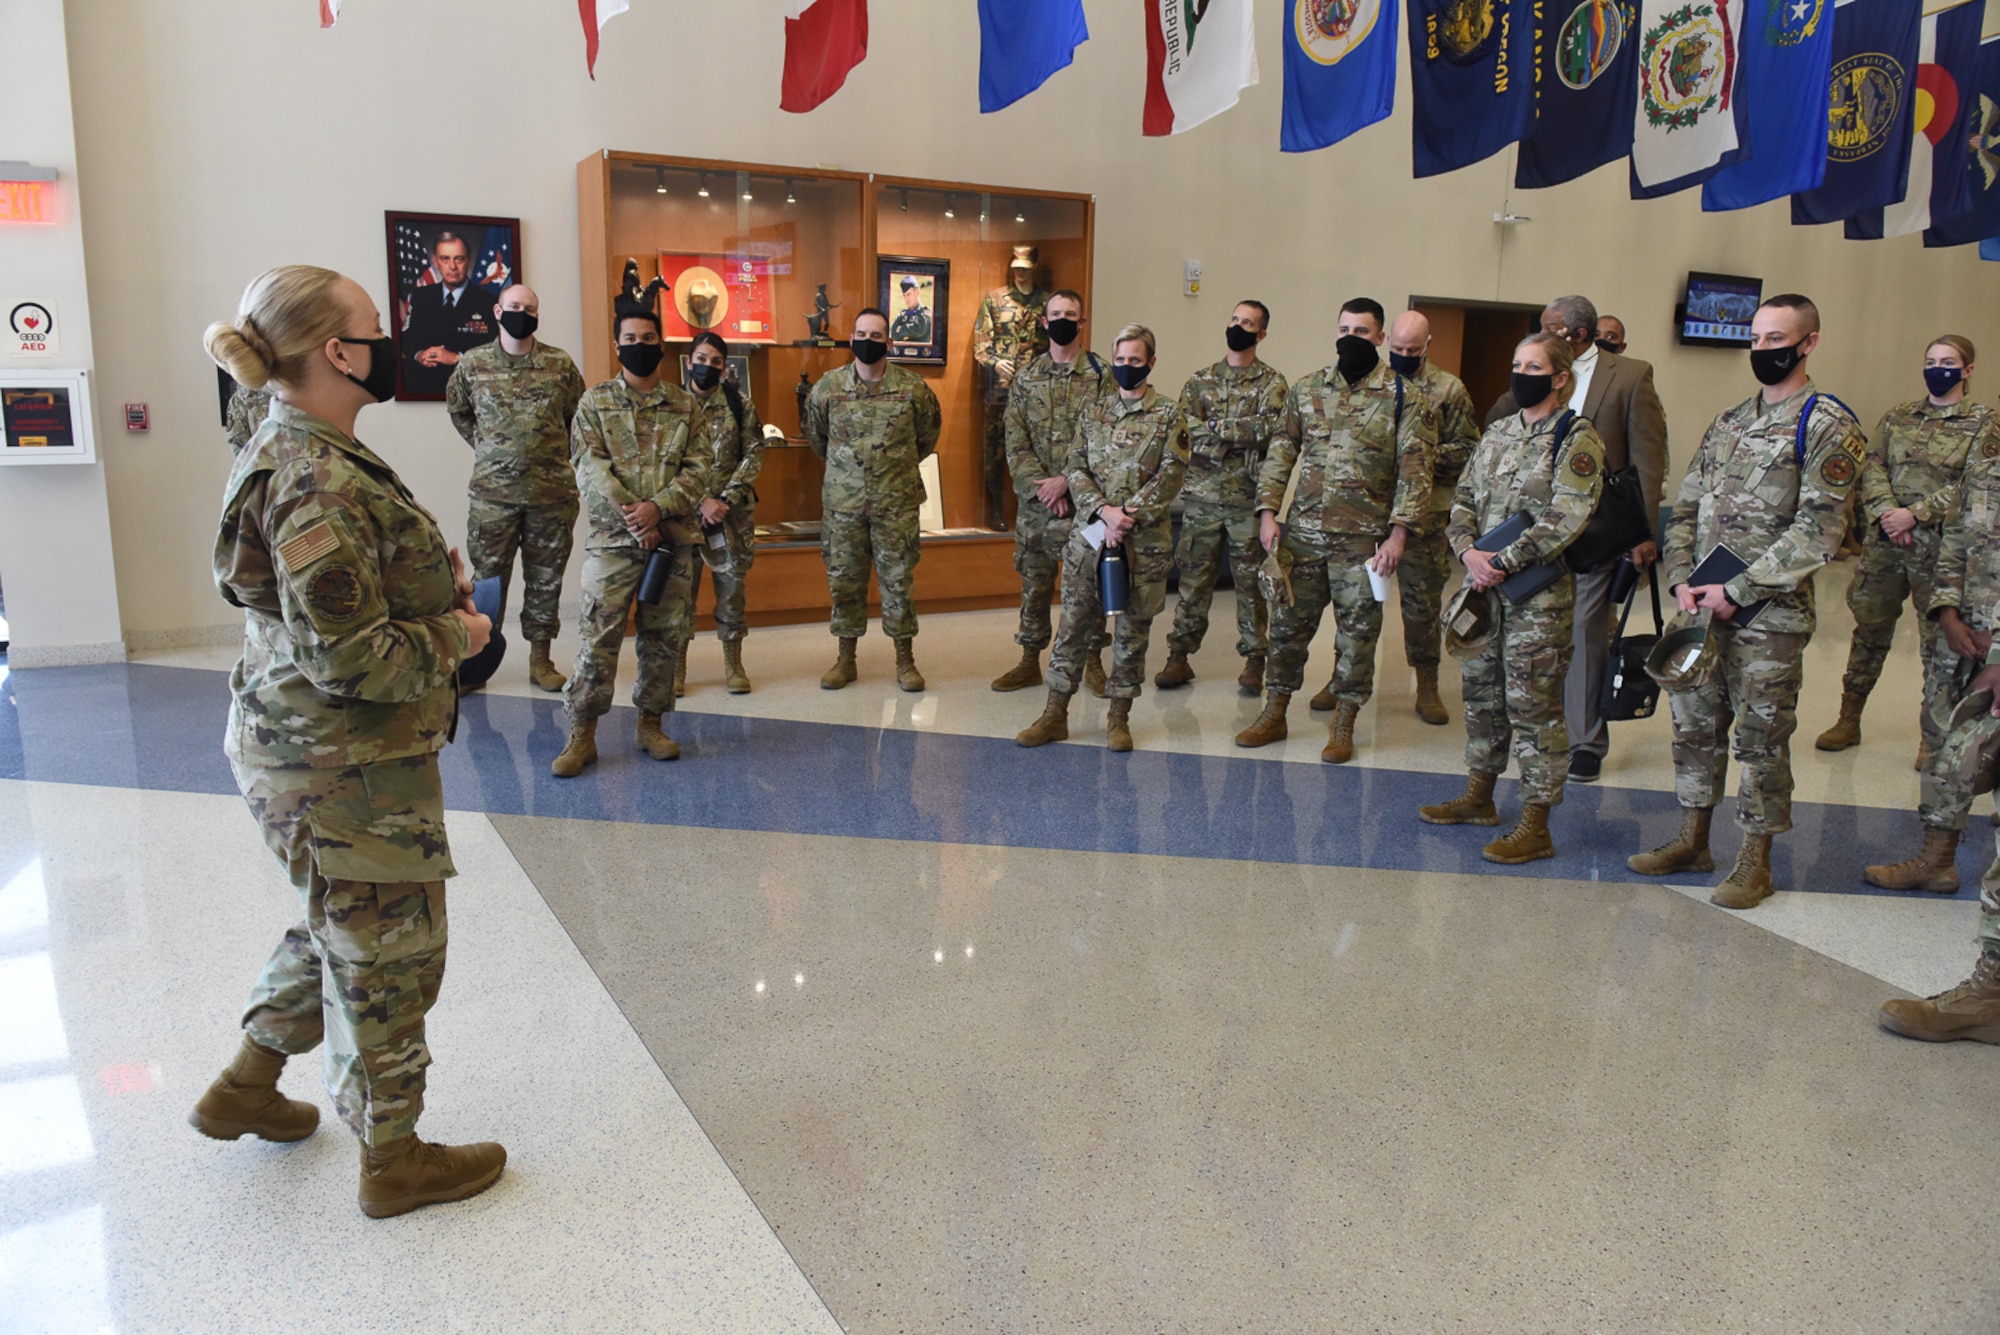 NCO gives tour of PRC